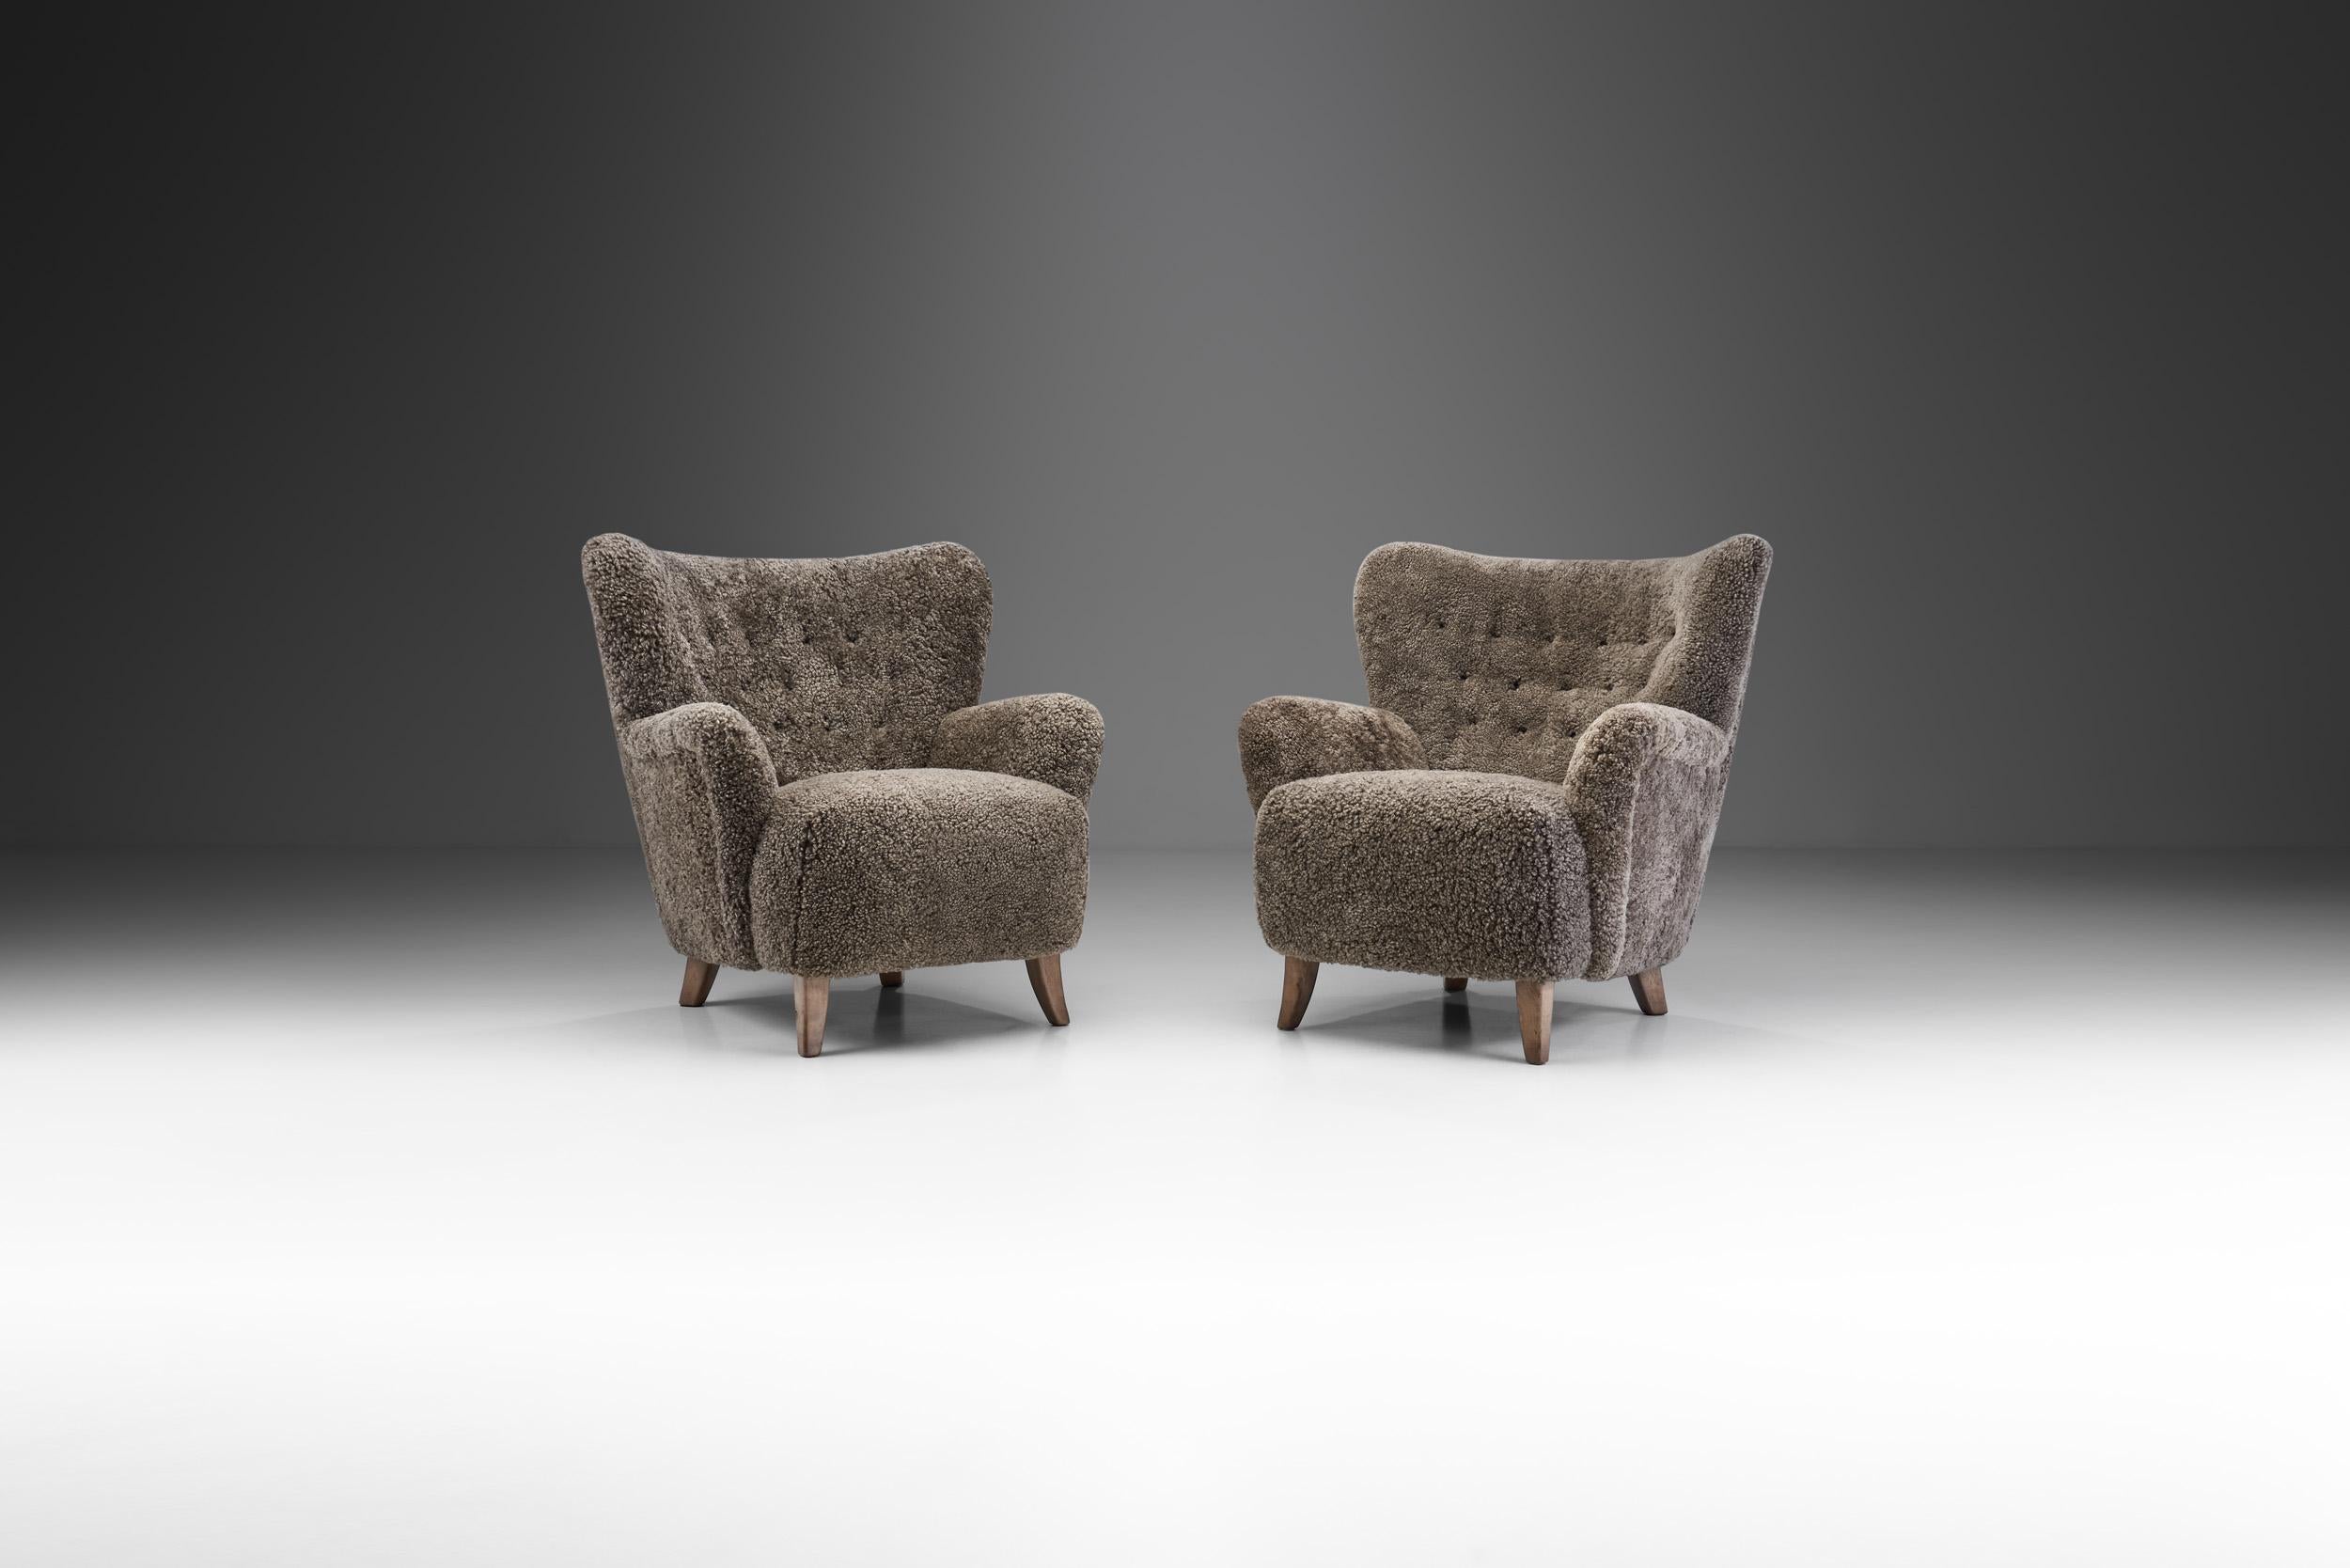 The “Laila” model by the Finnish designer Ilmari Lappalainen originates from 1948, with the earliest original drawings kept in the Lahti City Museum in their Lappalainen Collection. 

This pair of “nr. 238” armchairs are from the Finnish designer’s